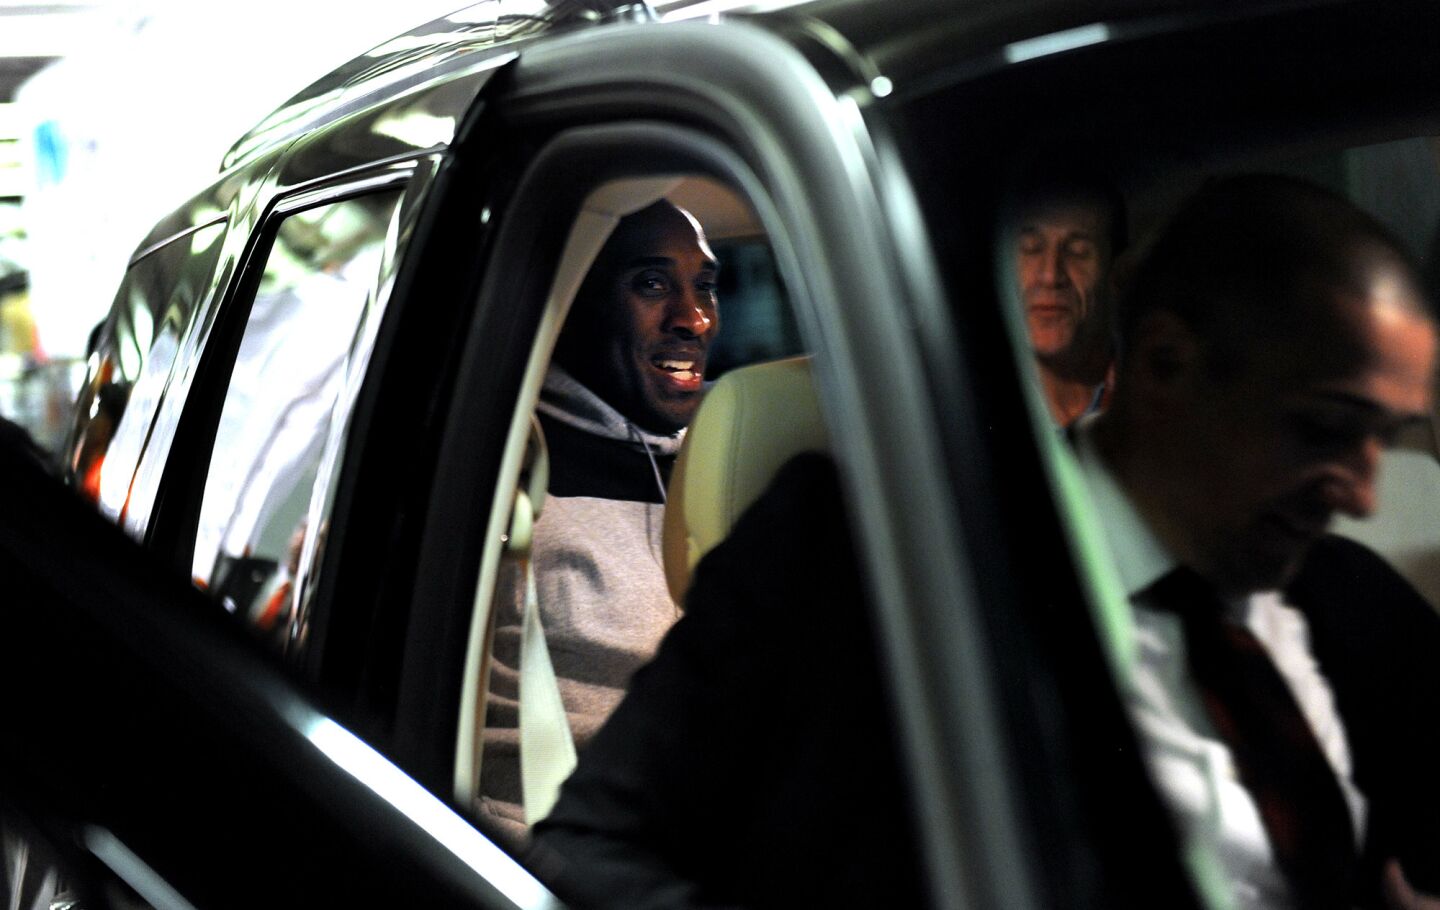 Kobe Bryant gets into the back of a private vehicle with his security team while leaving the arena in Phoenixon March 23.